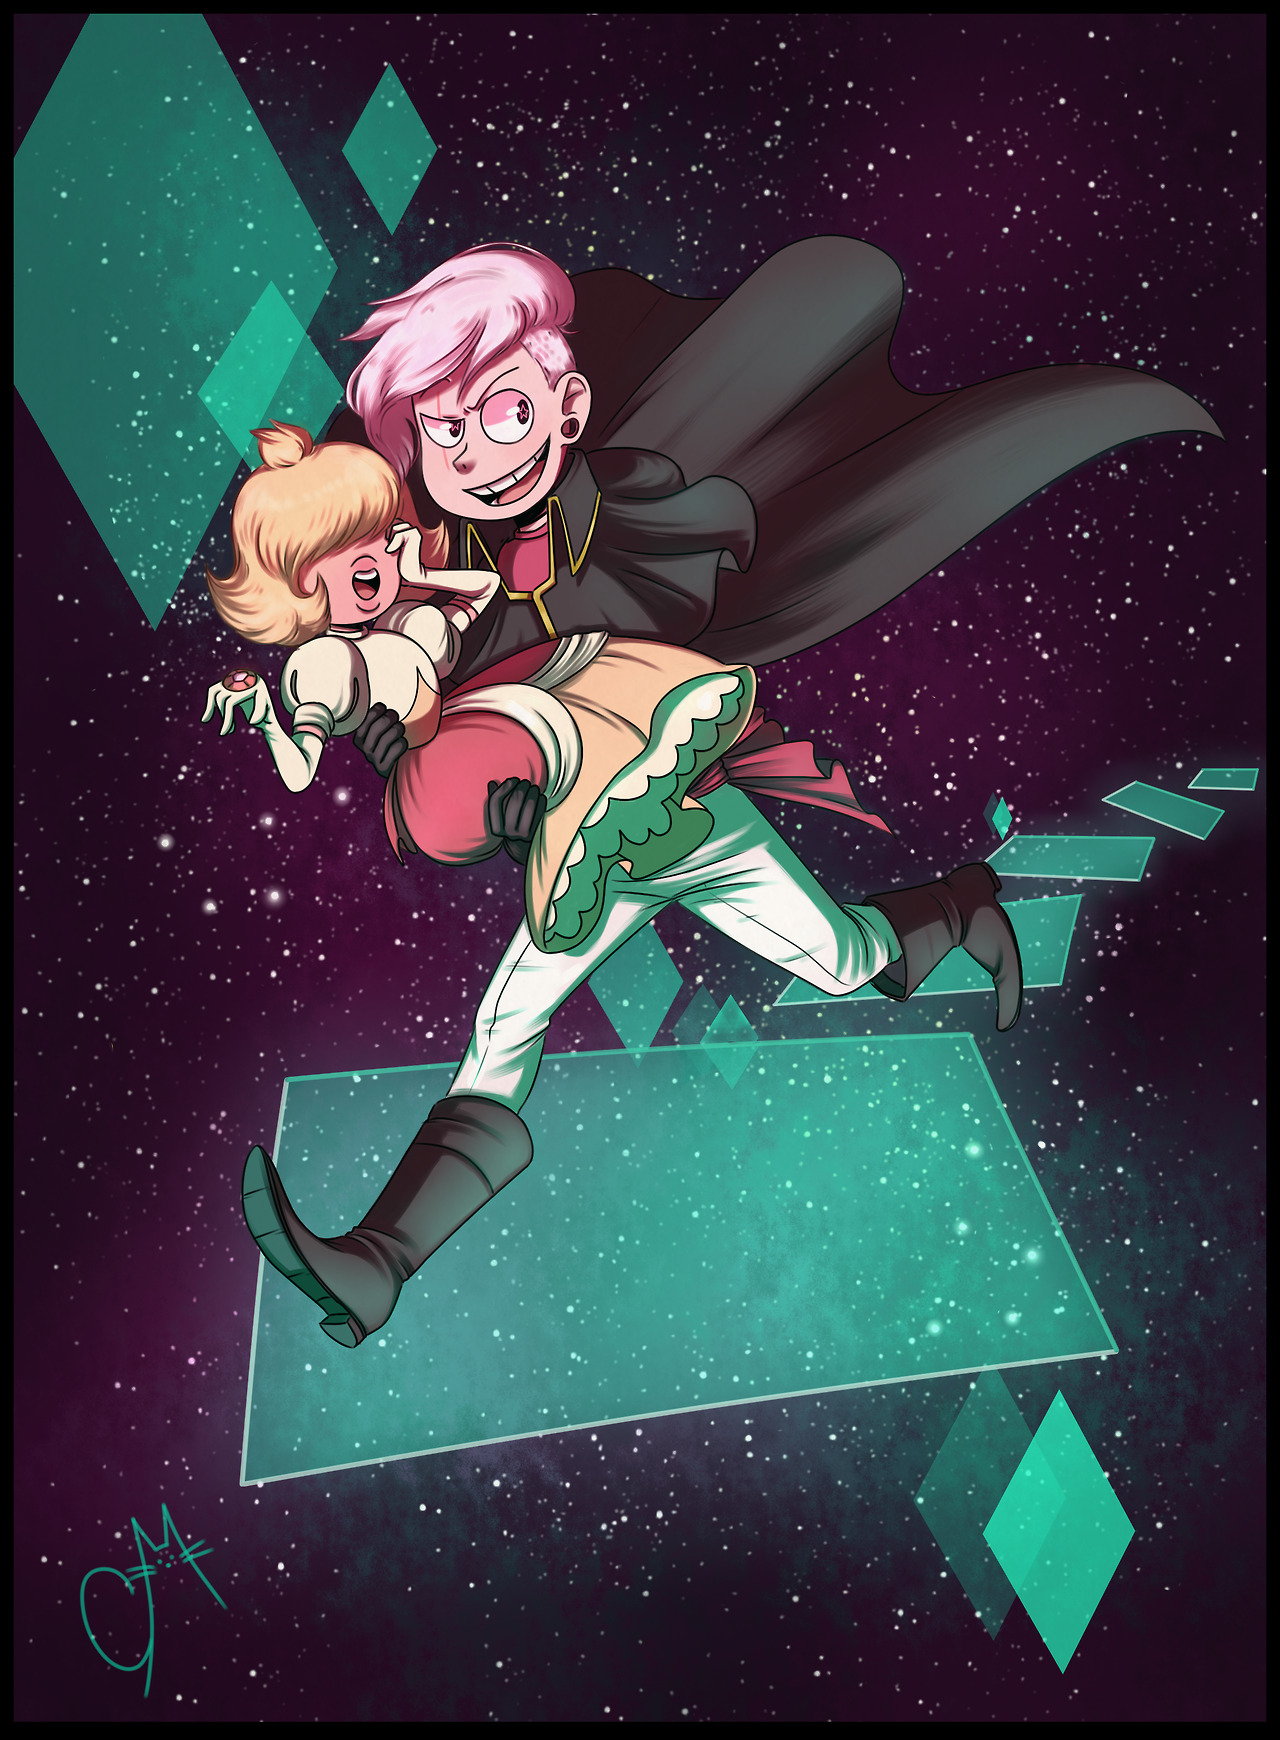 A drawing that i made some time before and forgot to post. I want so hard to know more about the offcolors and pink diamond. The lasts episdes just give me more questions! (Still loving Lars and Paddy